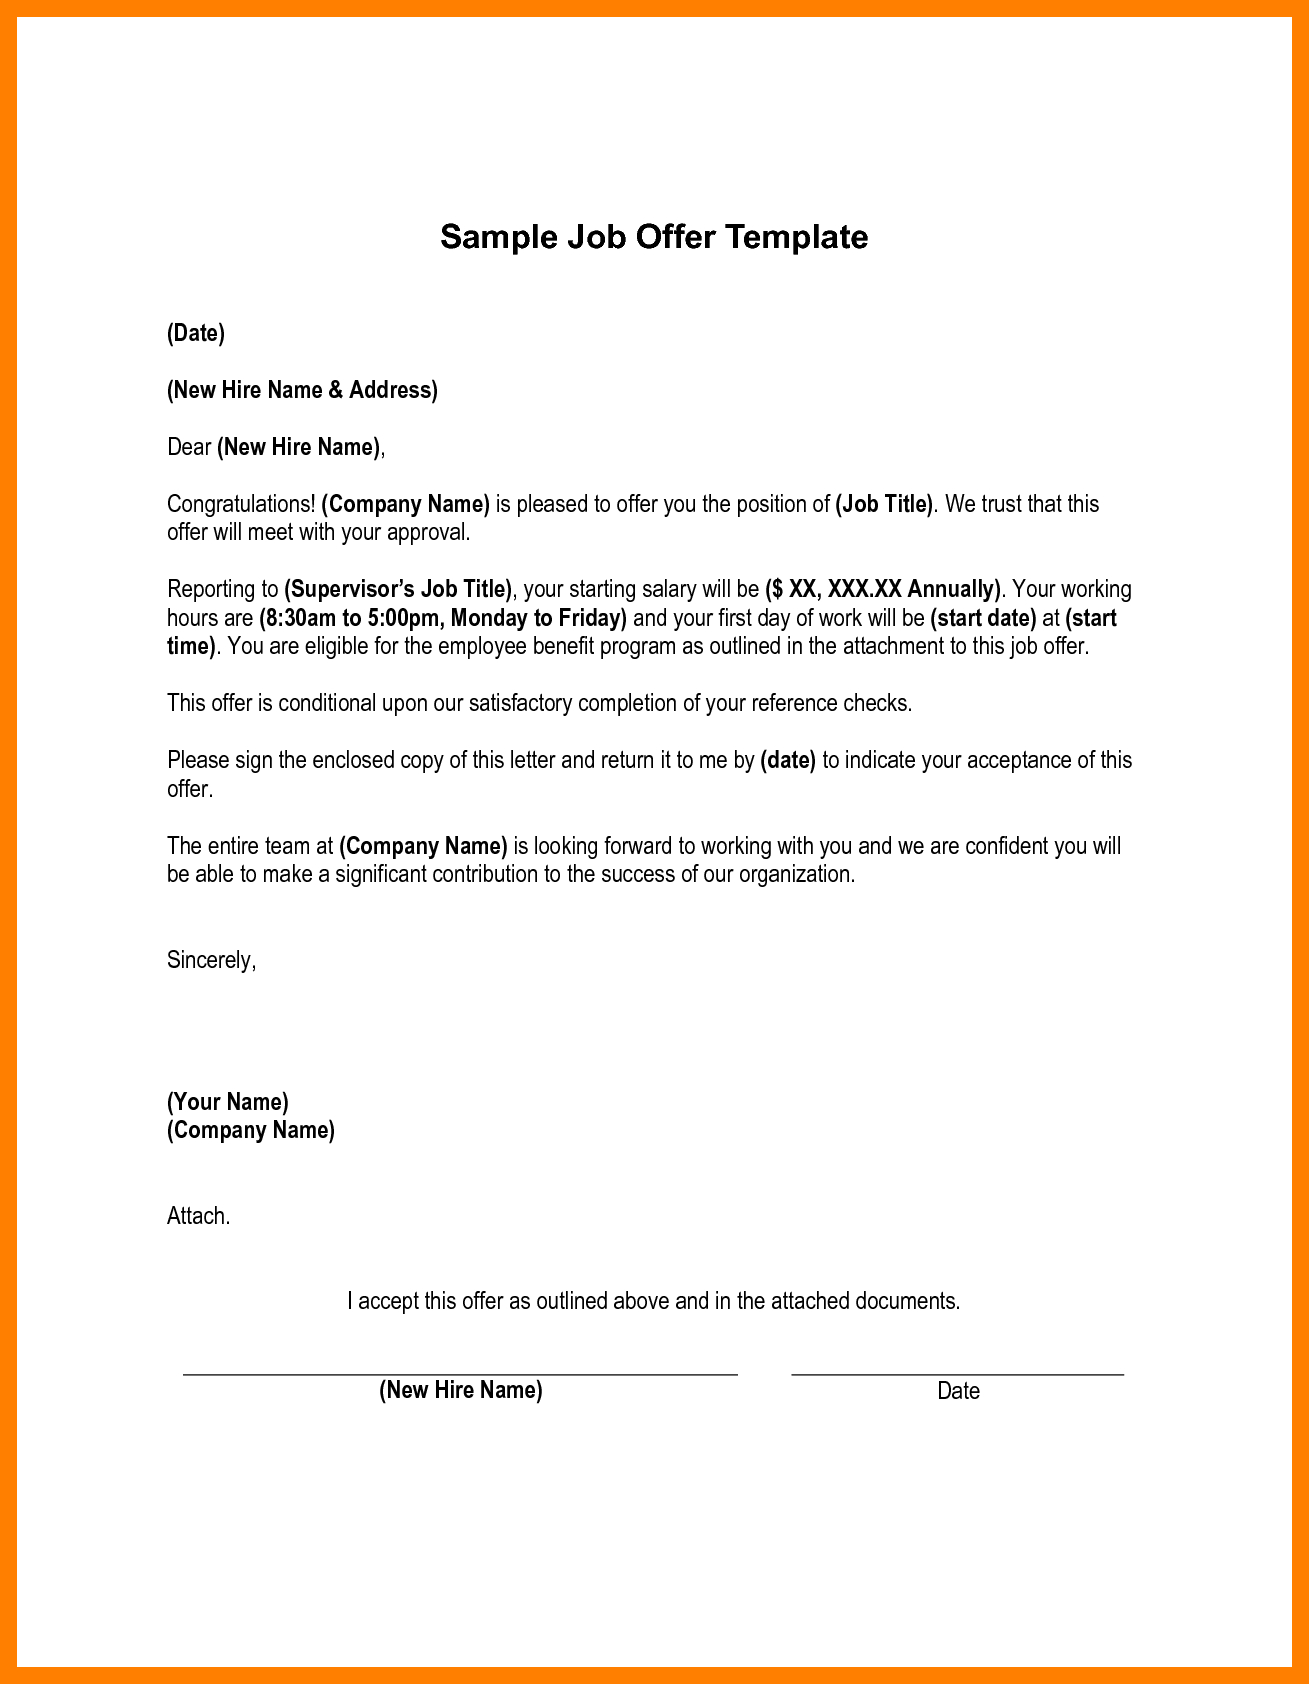 rental offer letter template example-Job Appointment Letter Format In Word Image collections Letter Samples Format 8-g